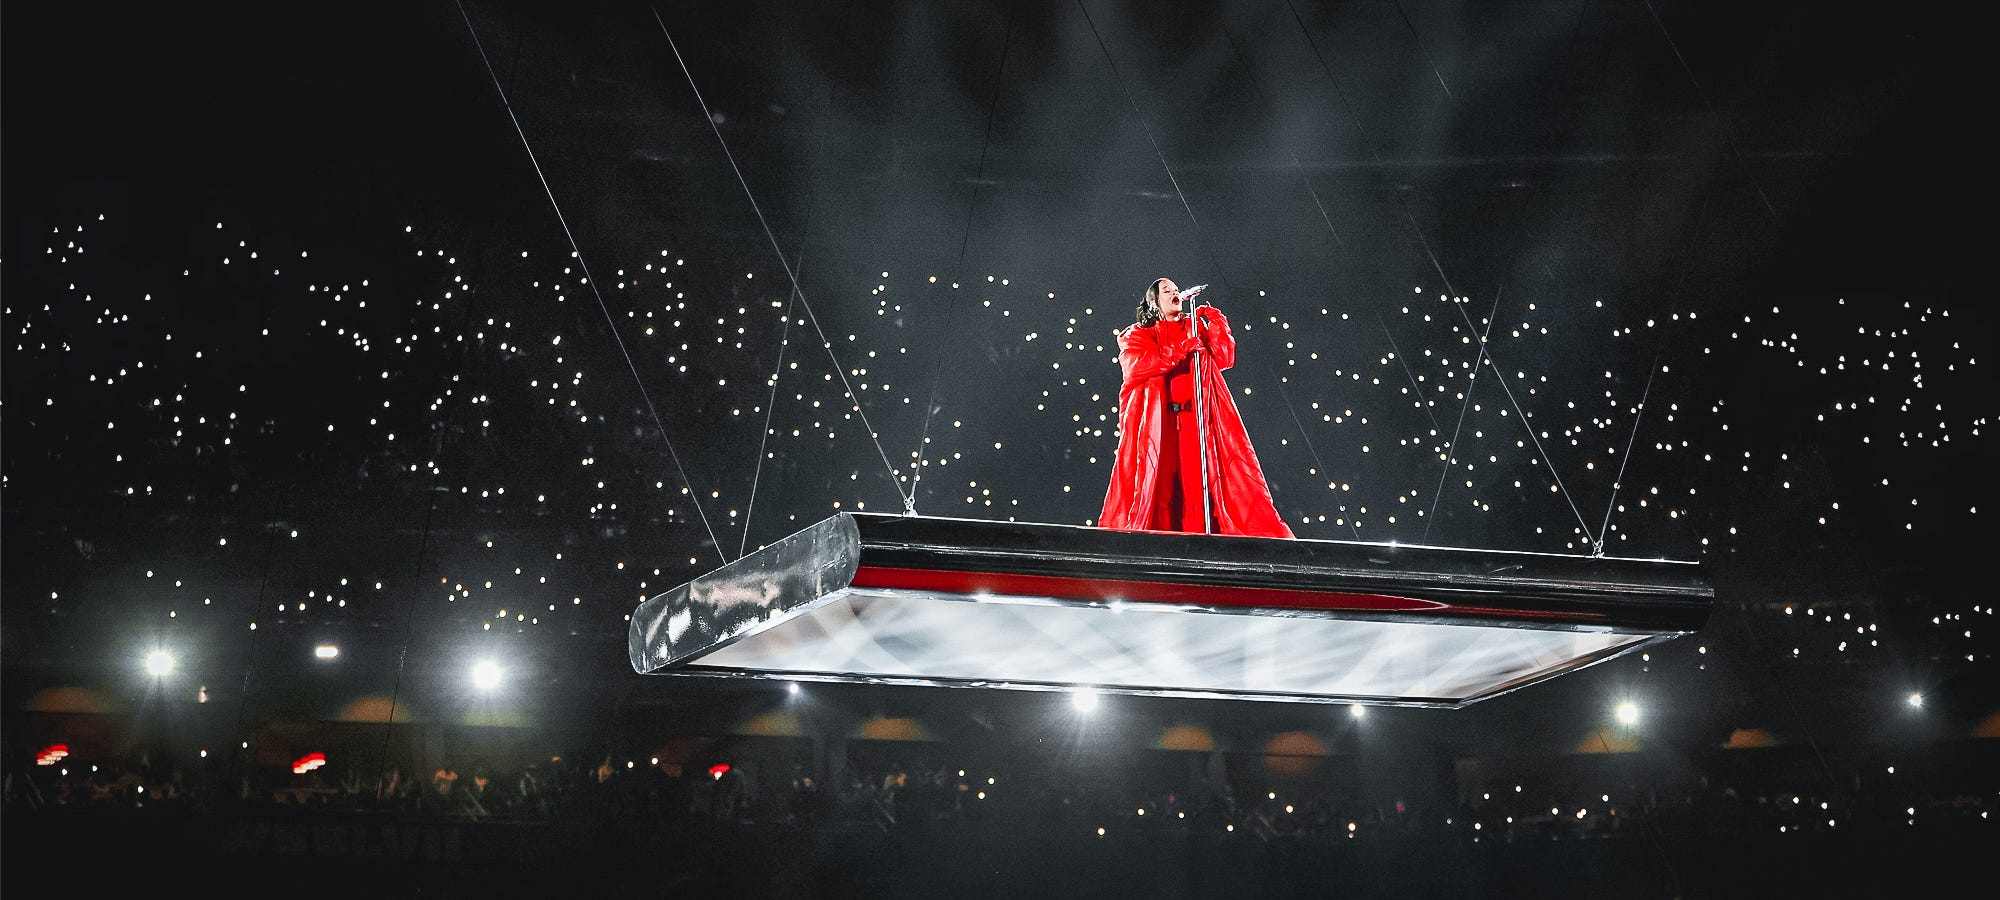 Rihanna floats above it all. (Gregory Shamus via Getty Images)